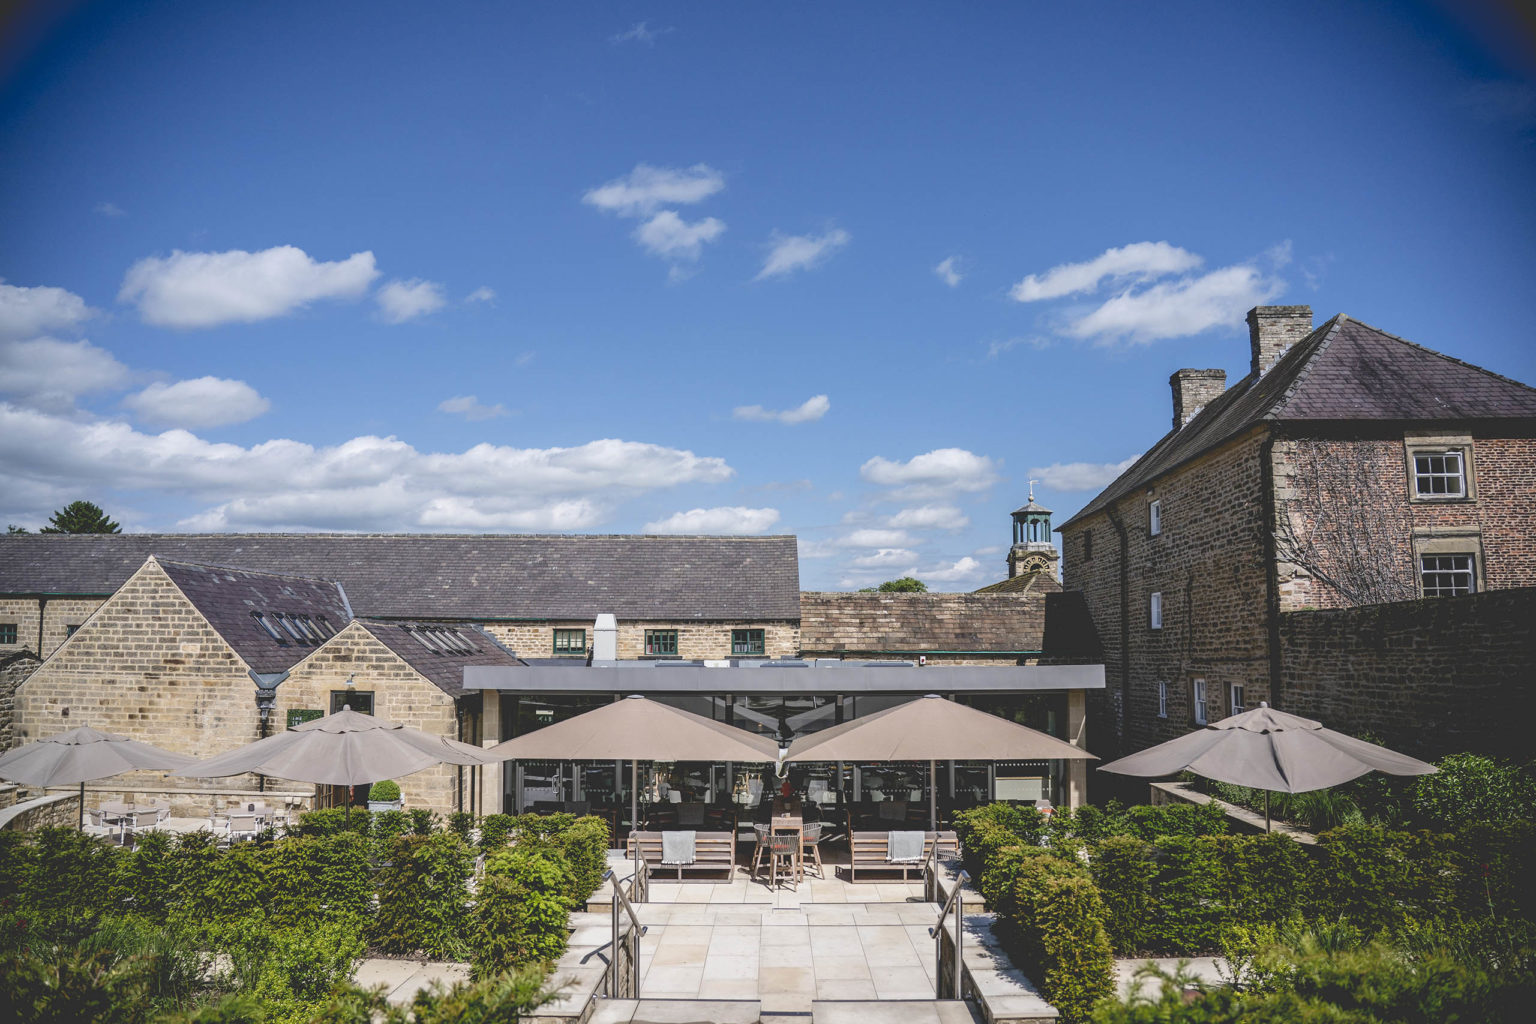 Exterior view of The Terrace Restaurant and Bar, where guests dine alfresco, on the Swinton Estate in North Yorkshire